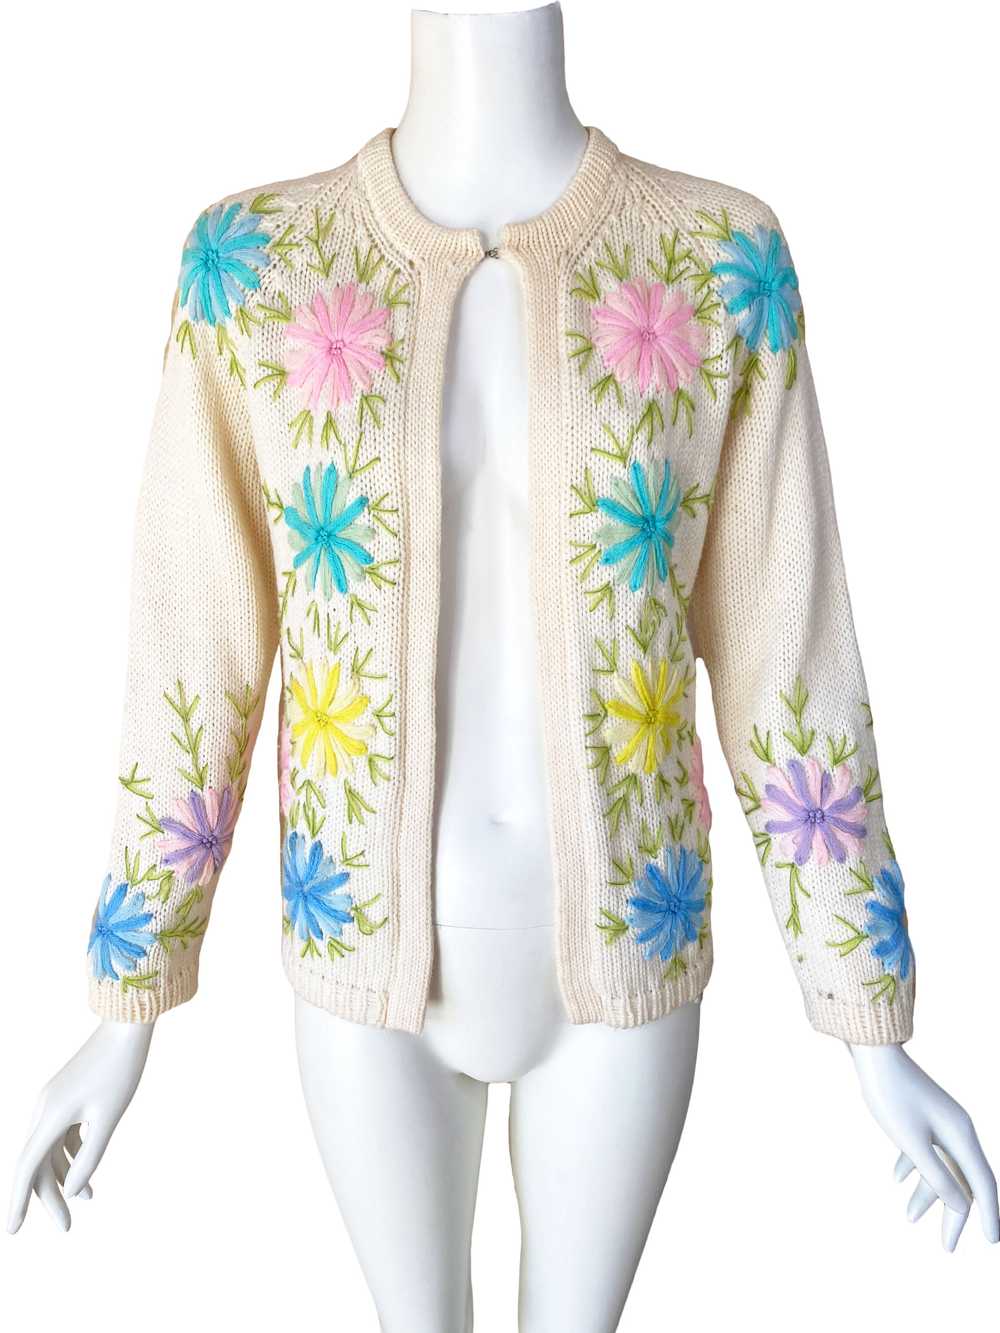 1960s Pastel Embroidered Cardgan - image 1